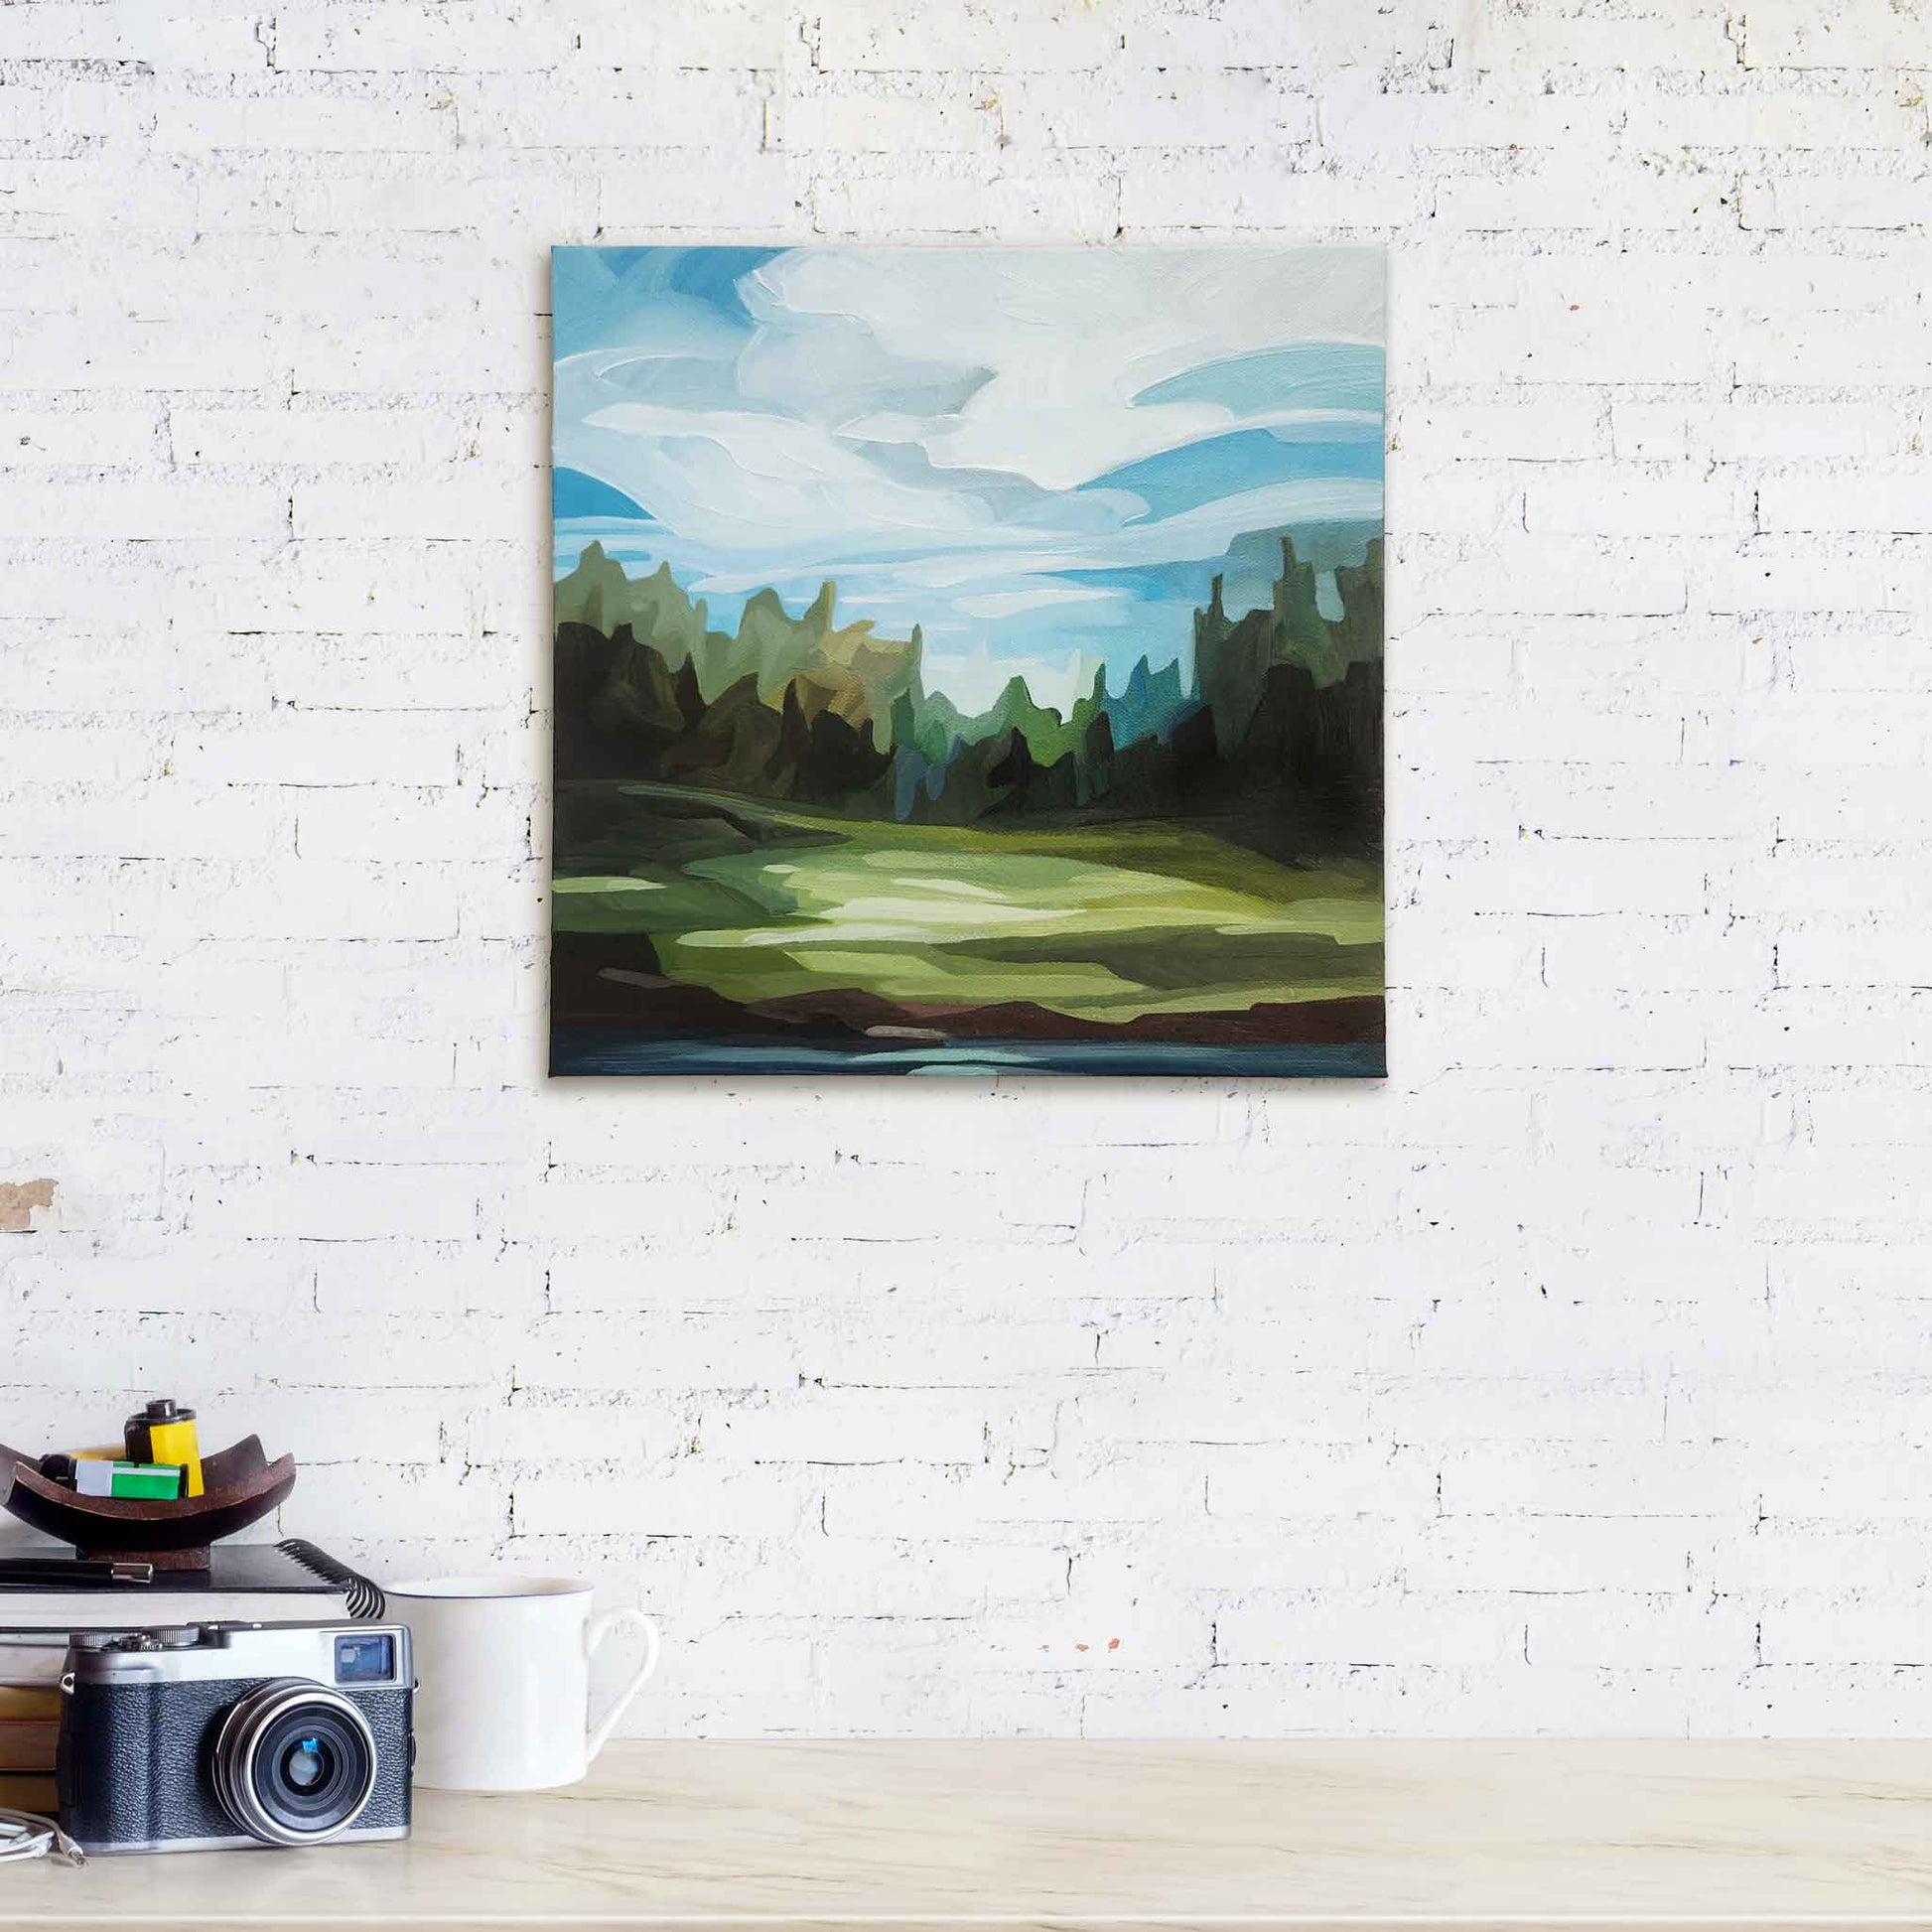 acrylic forest landscape painting 12-8